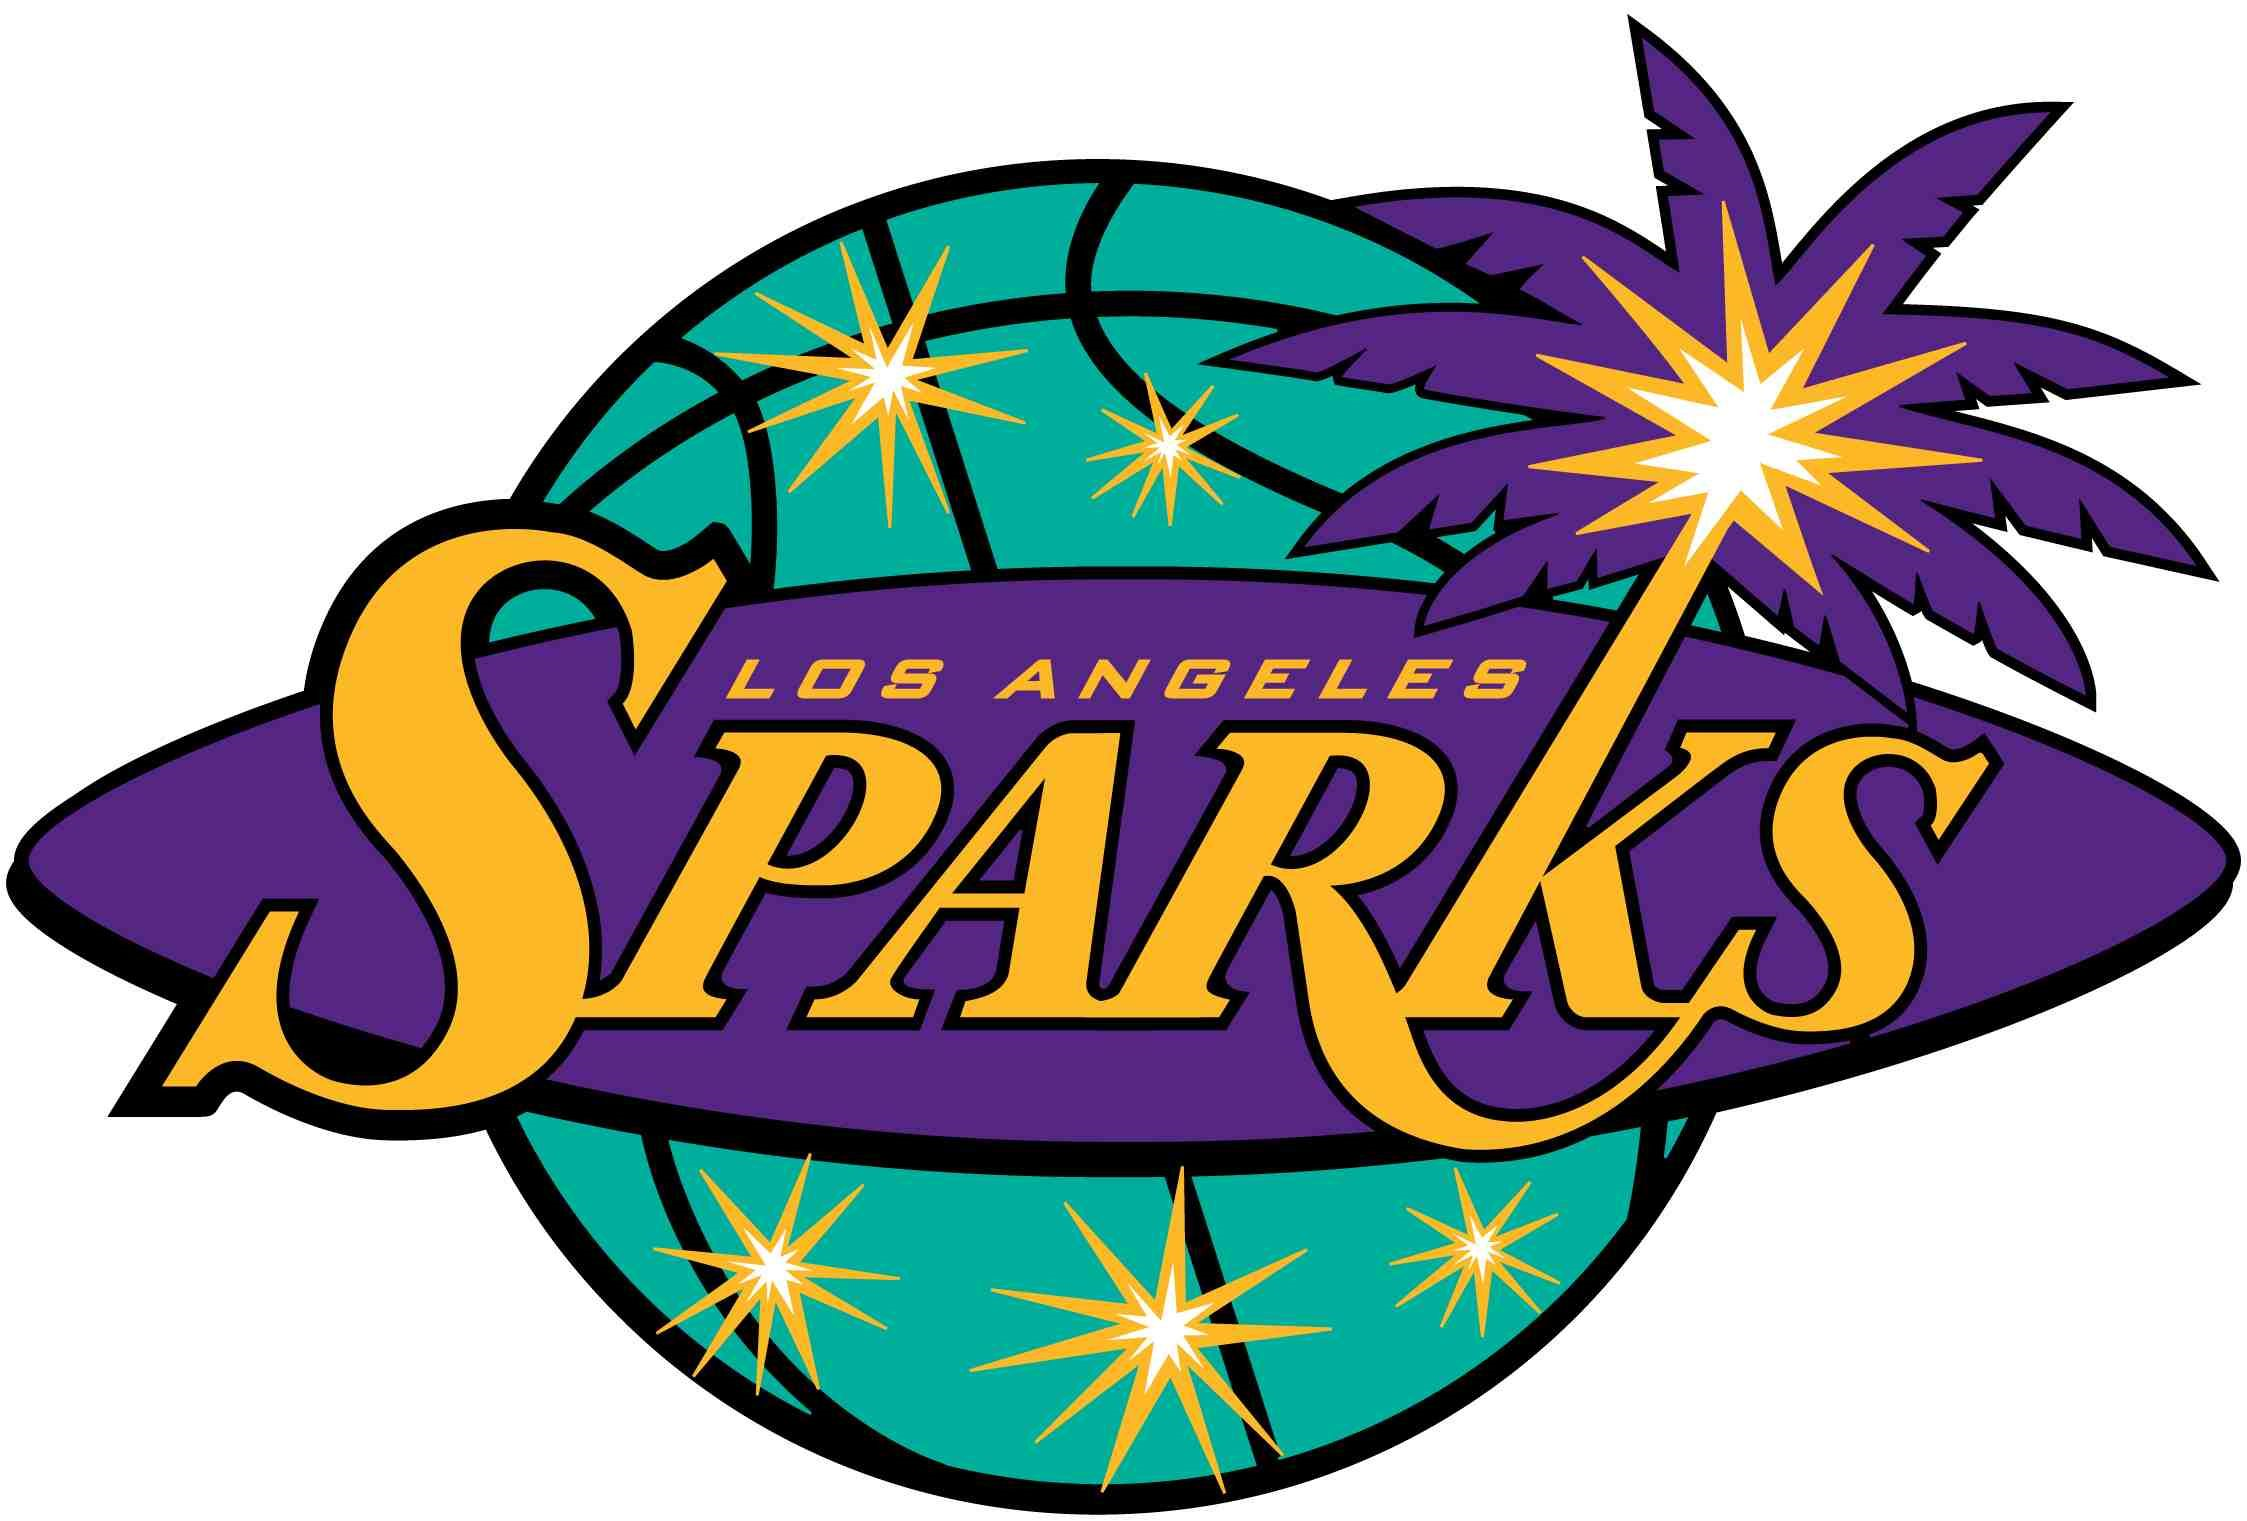 Los Angeles Sparks (w)